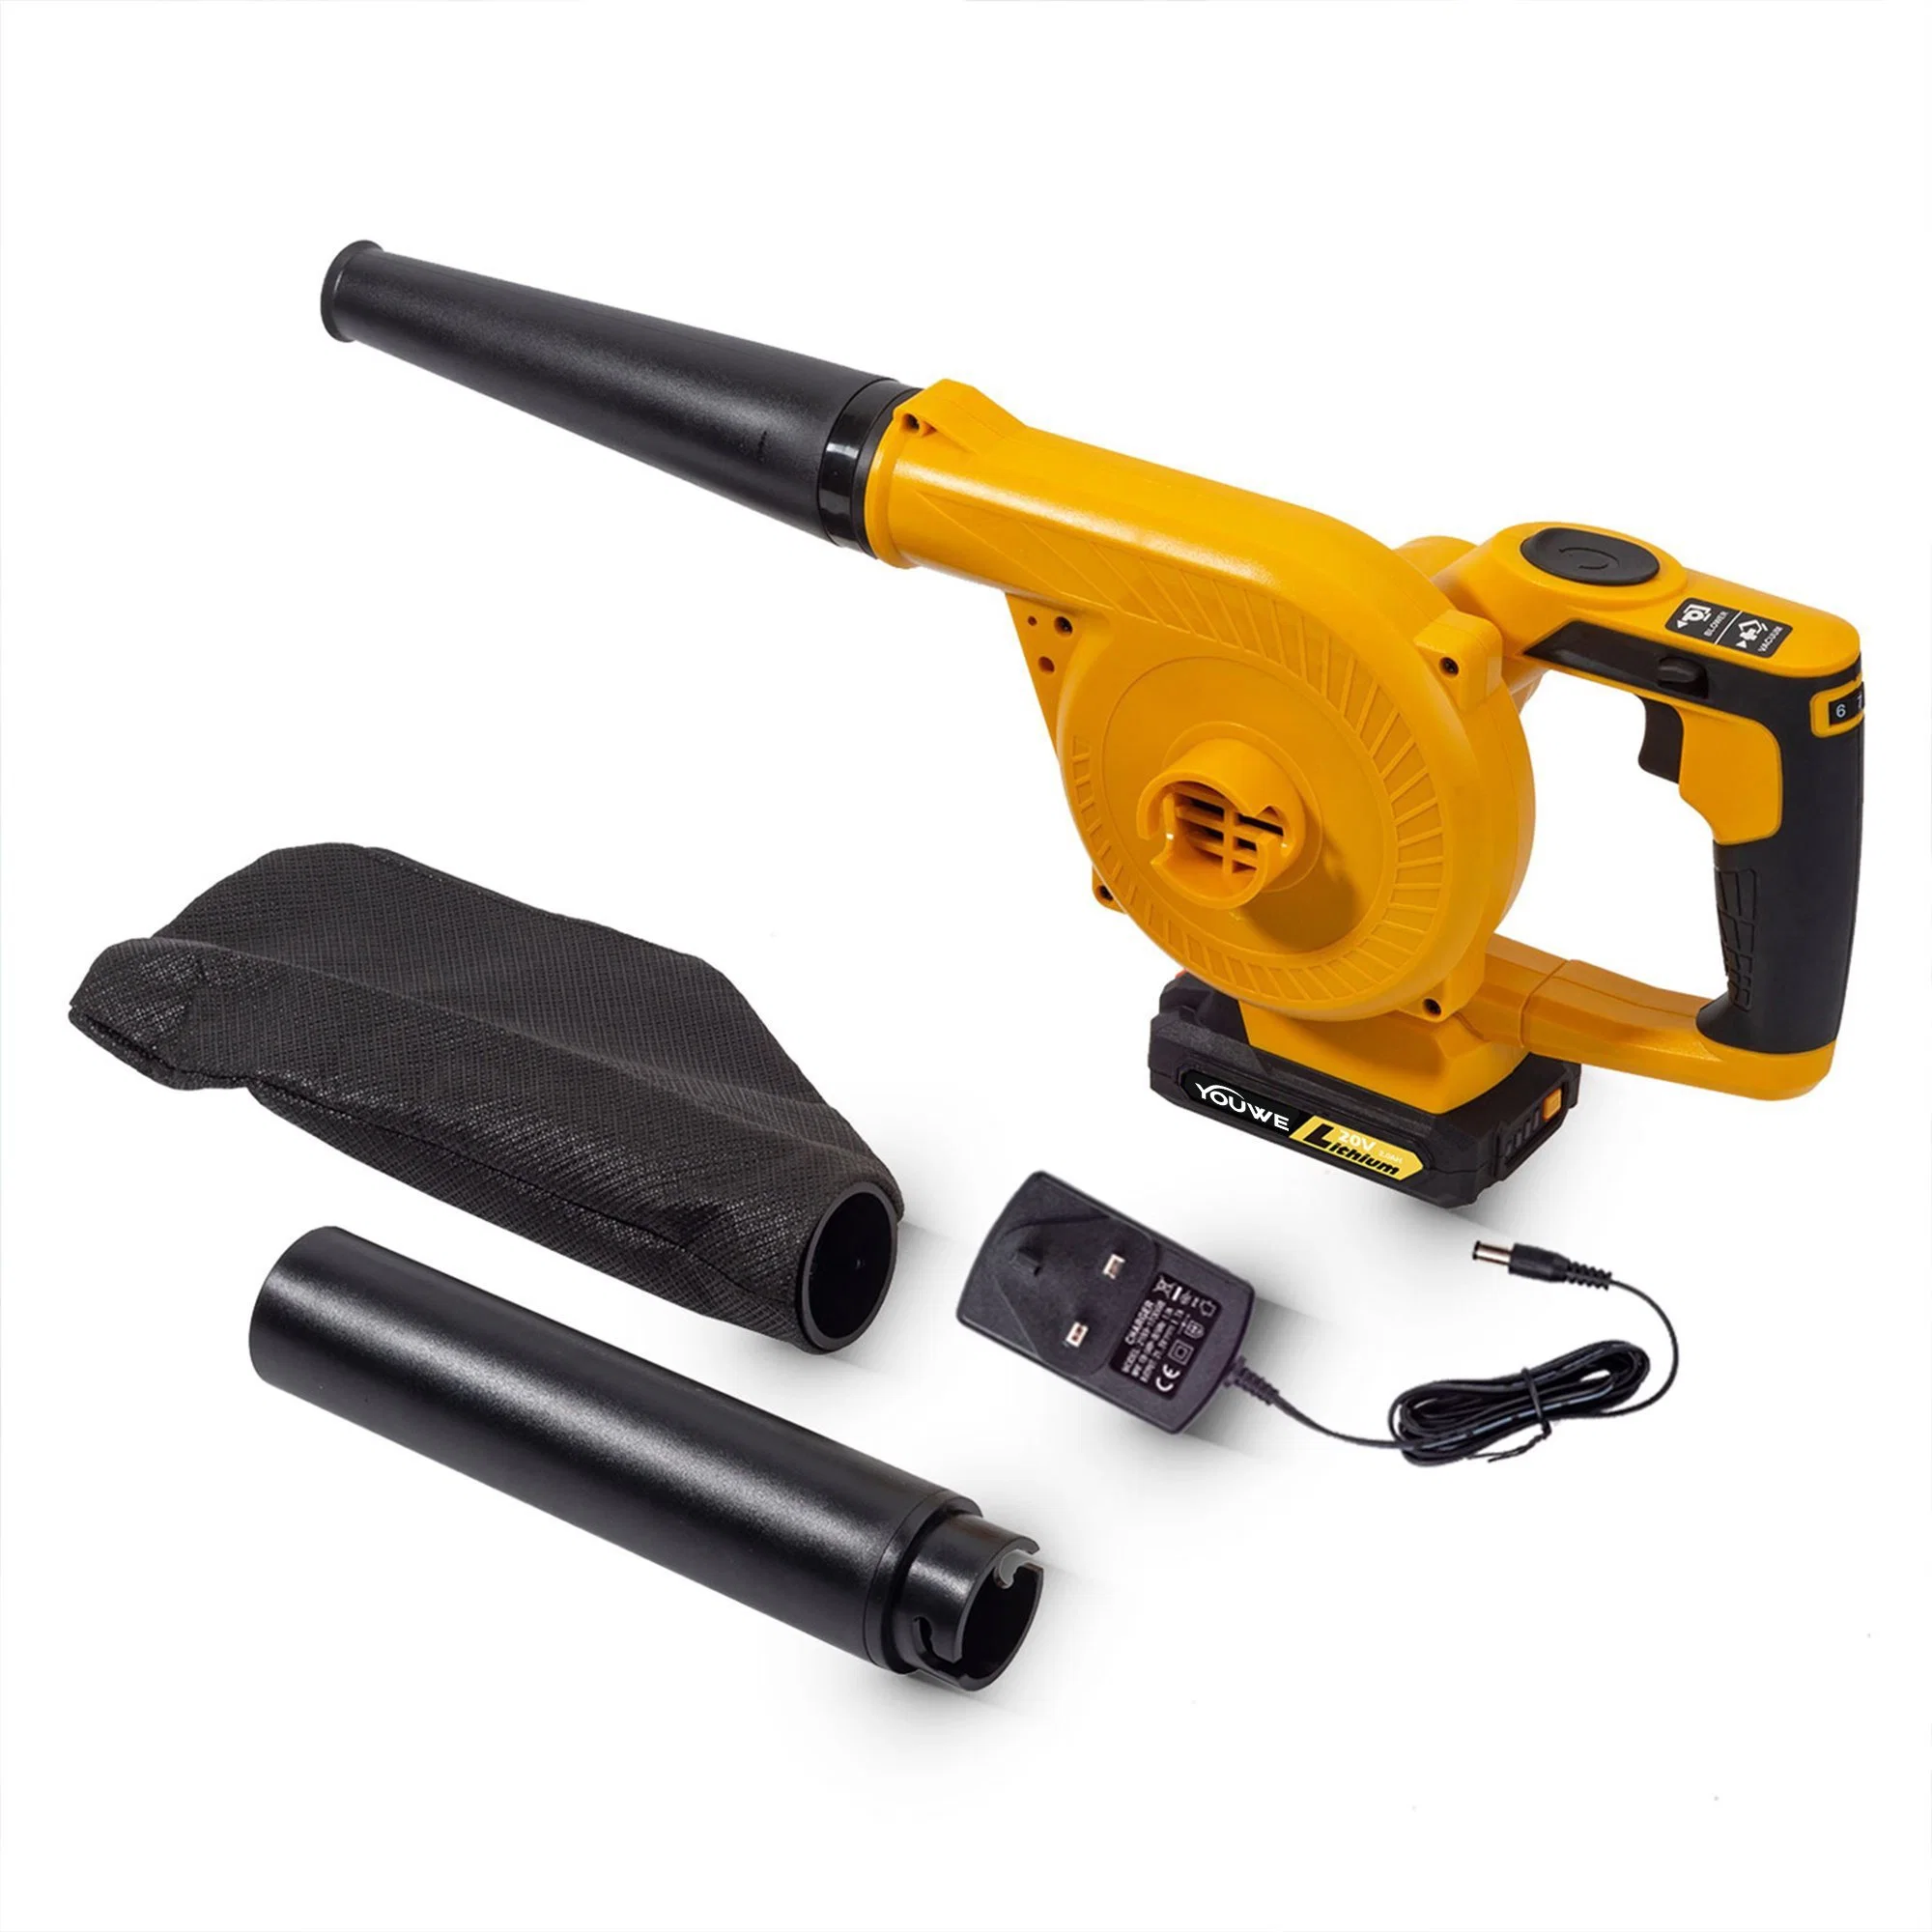 Portable Handheld Gasoline Garden Tools Petrol Leaf Air Blower with Durable Quality Power Tools Set Tool Sets Blower Fan Machine